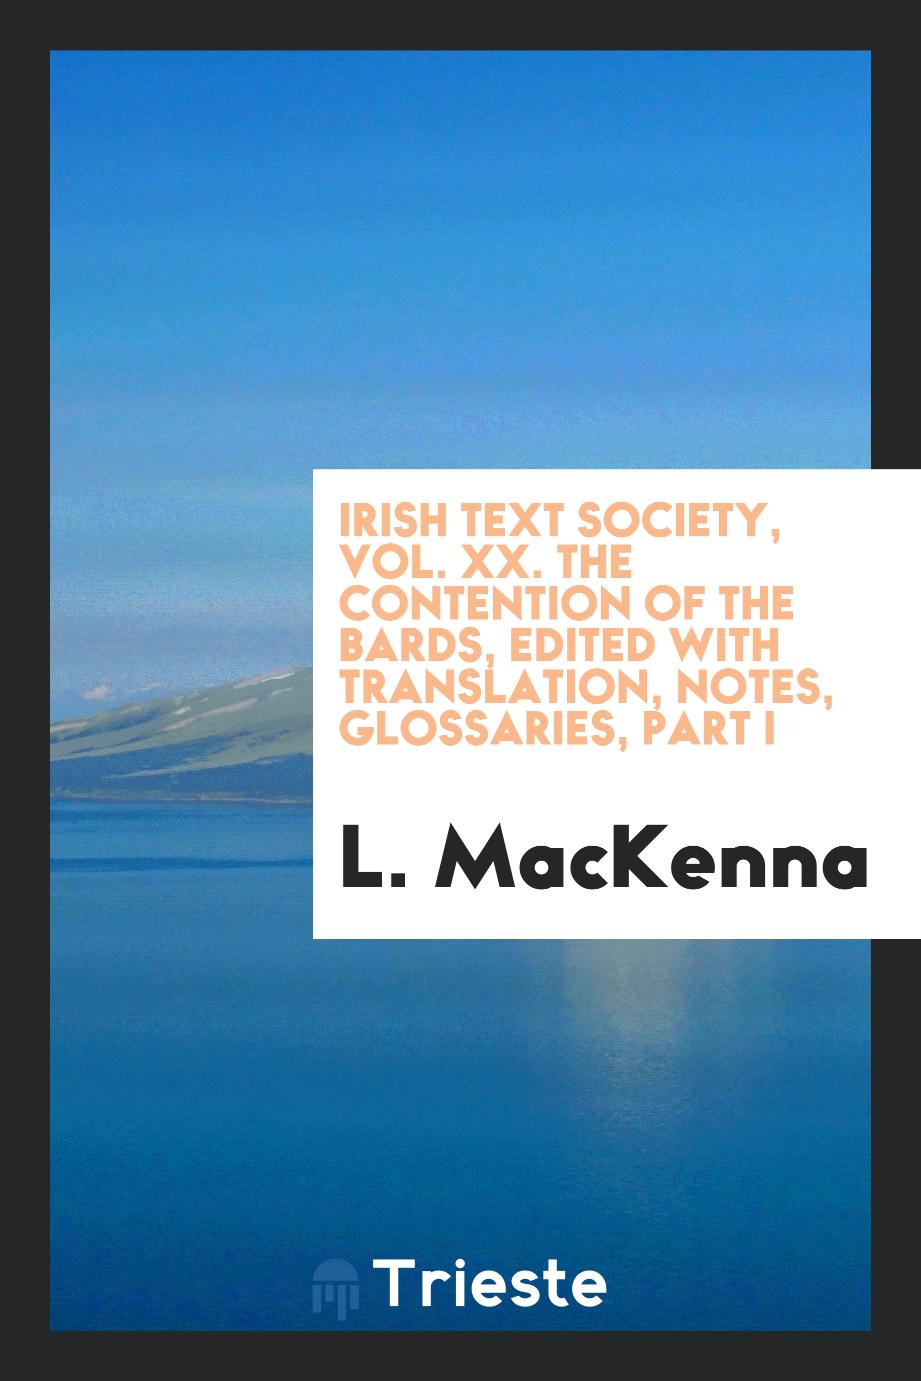 Irish Text Society, Vol. XX. The contention of the Bards, edited with translation, notes, glossaries, Part I